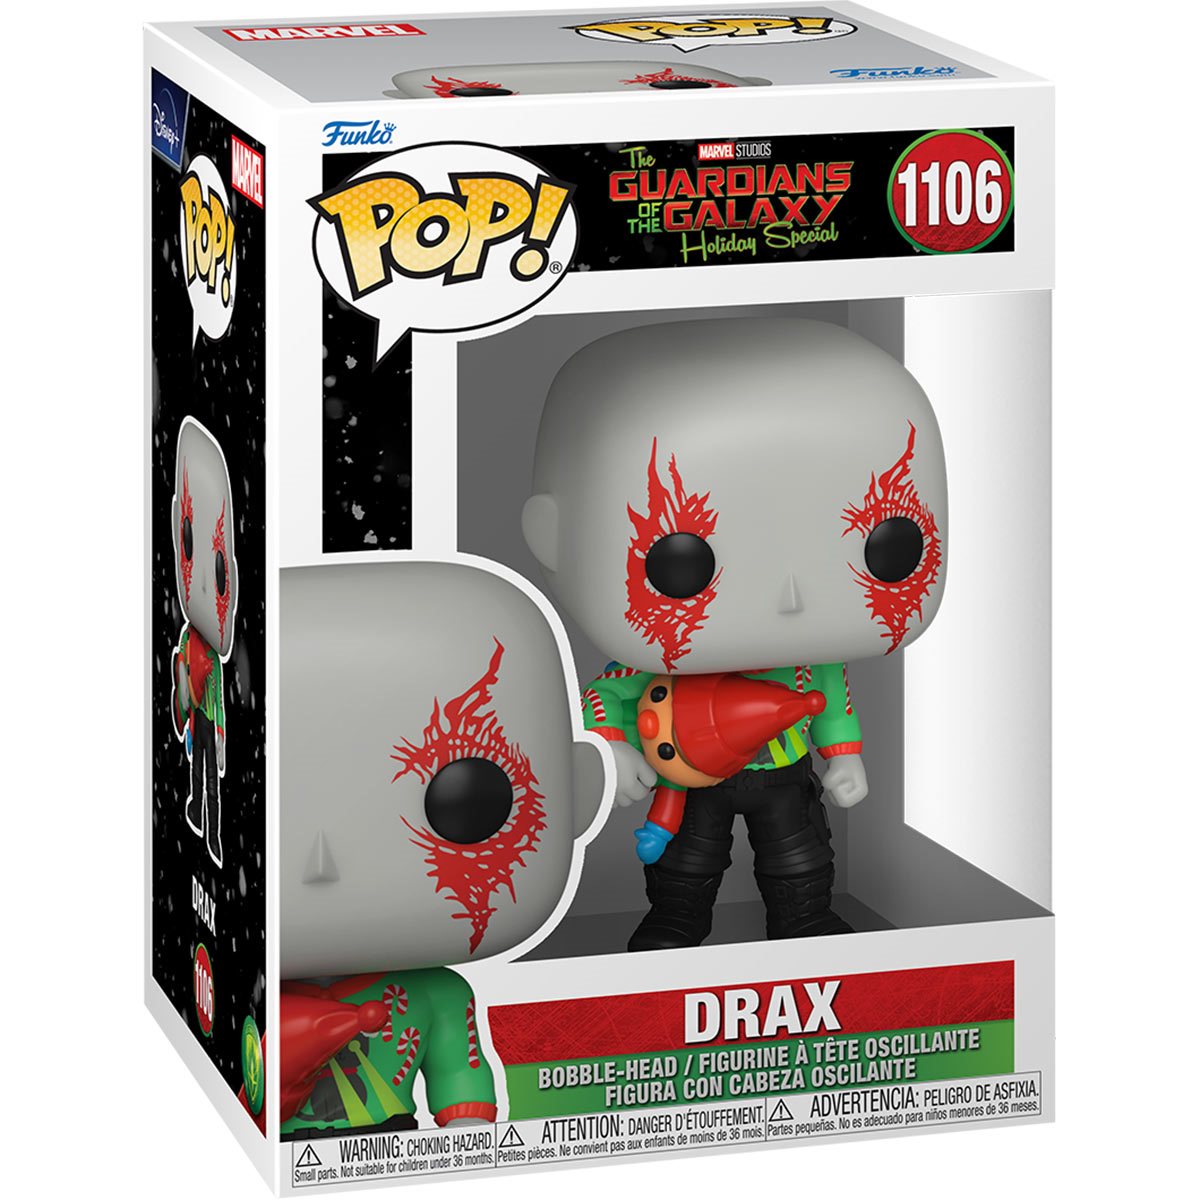 Drax - The Guardians of the Galaxy Holiday Special Pop! Vinyl Figure